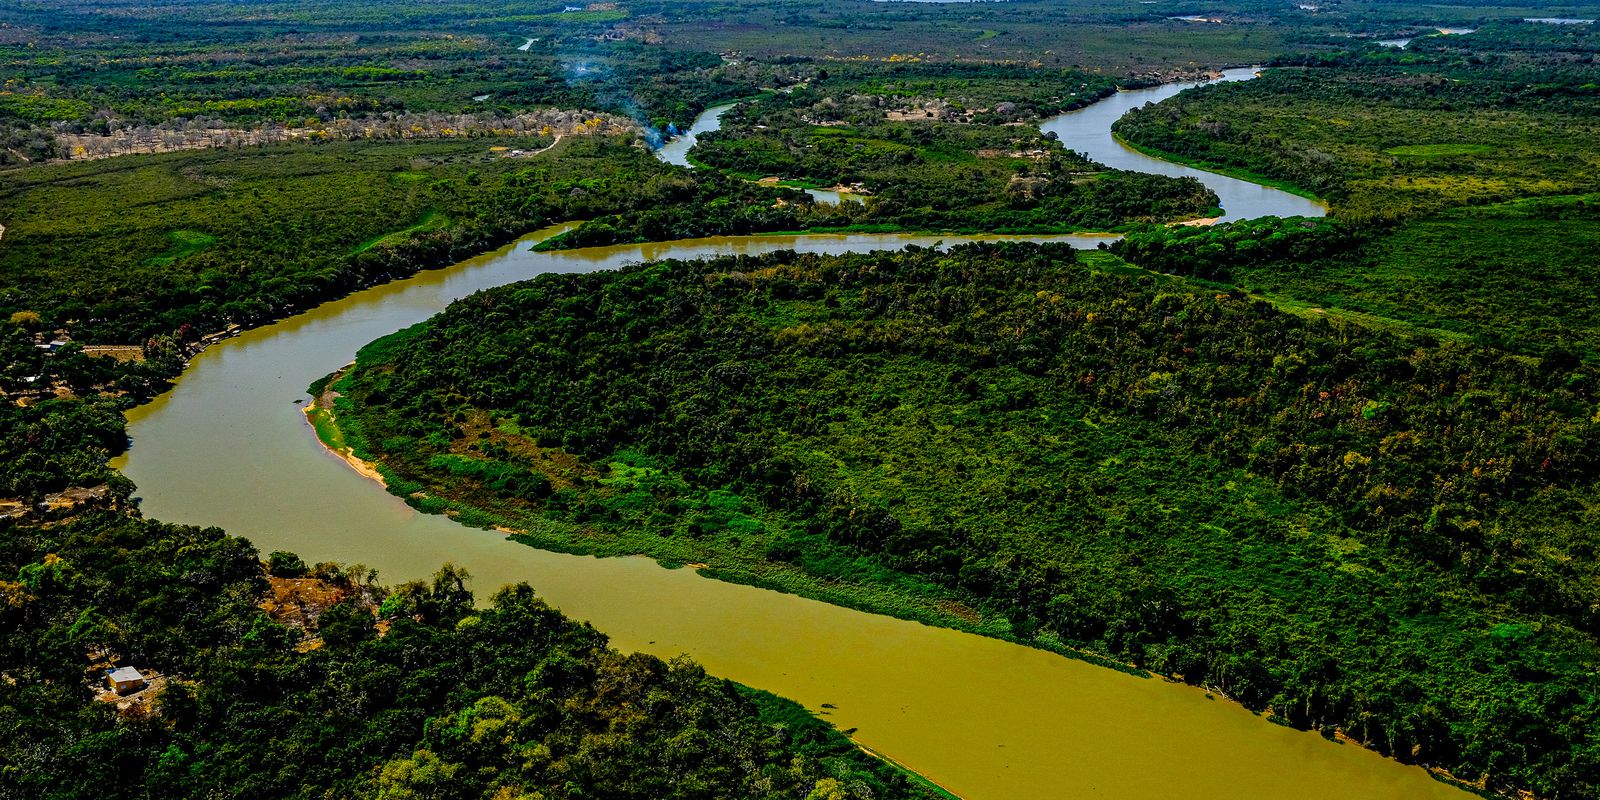 Project could expand protection to the Pantanal